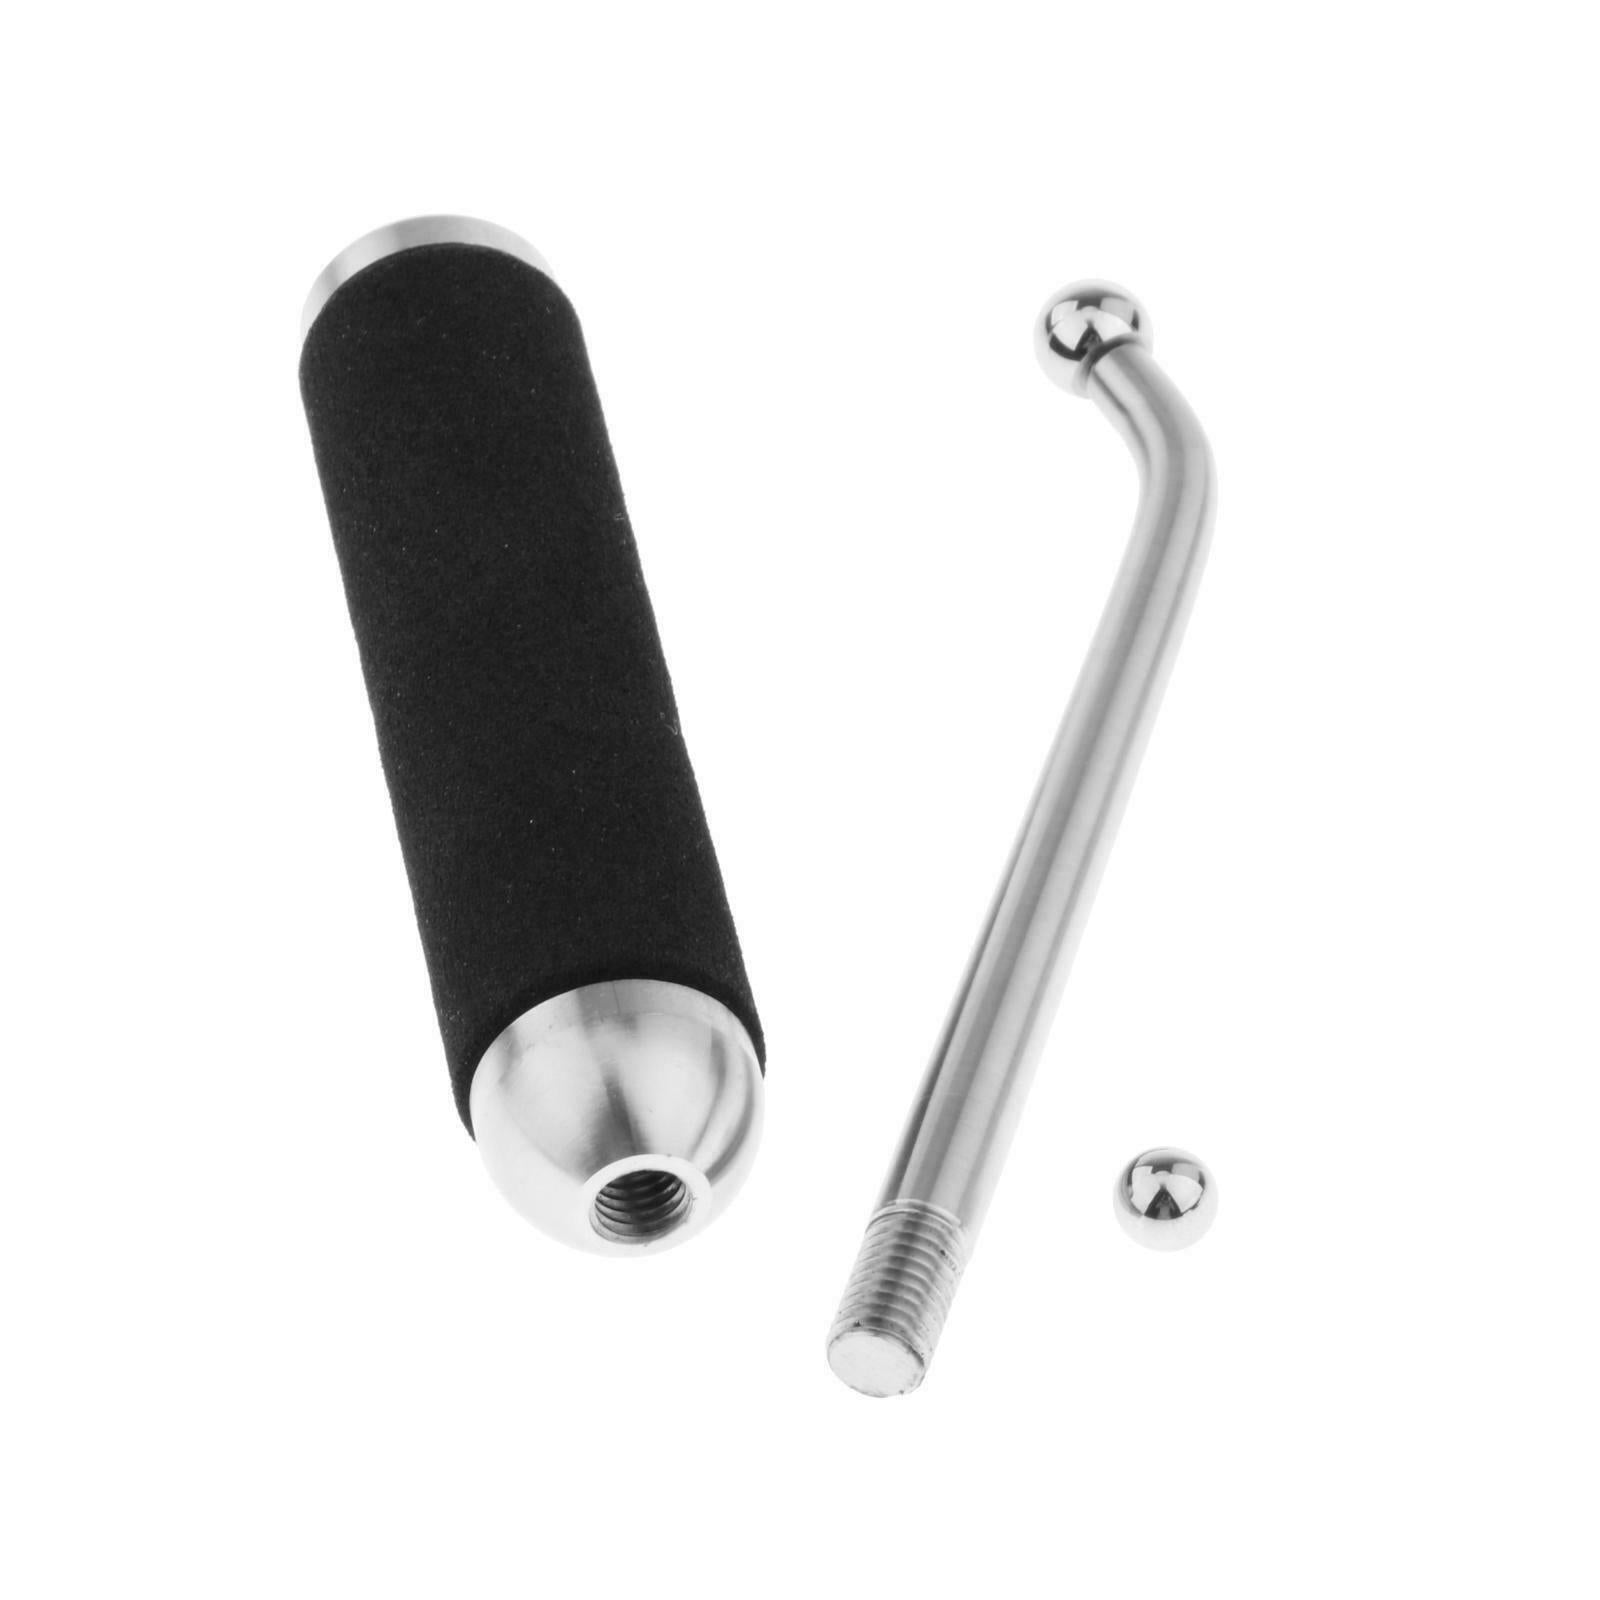 Trumpet Repair Handle Tools w/ 2 Balls Accessories for Trumpet French Horn